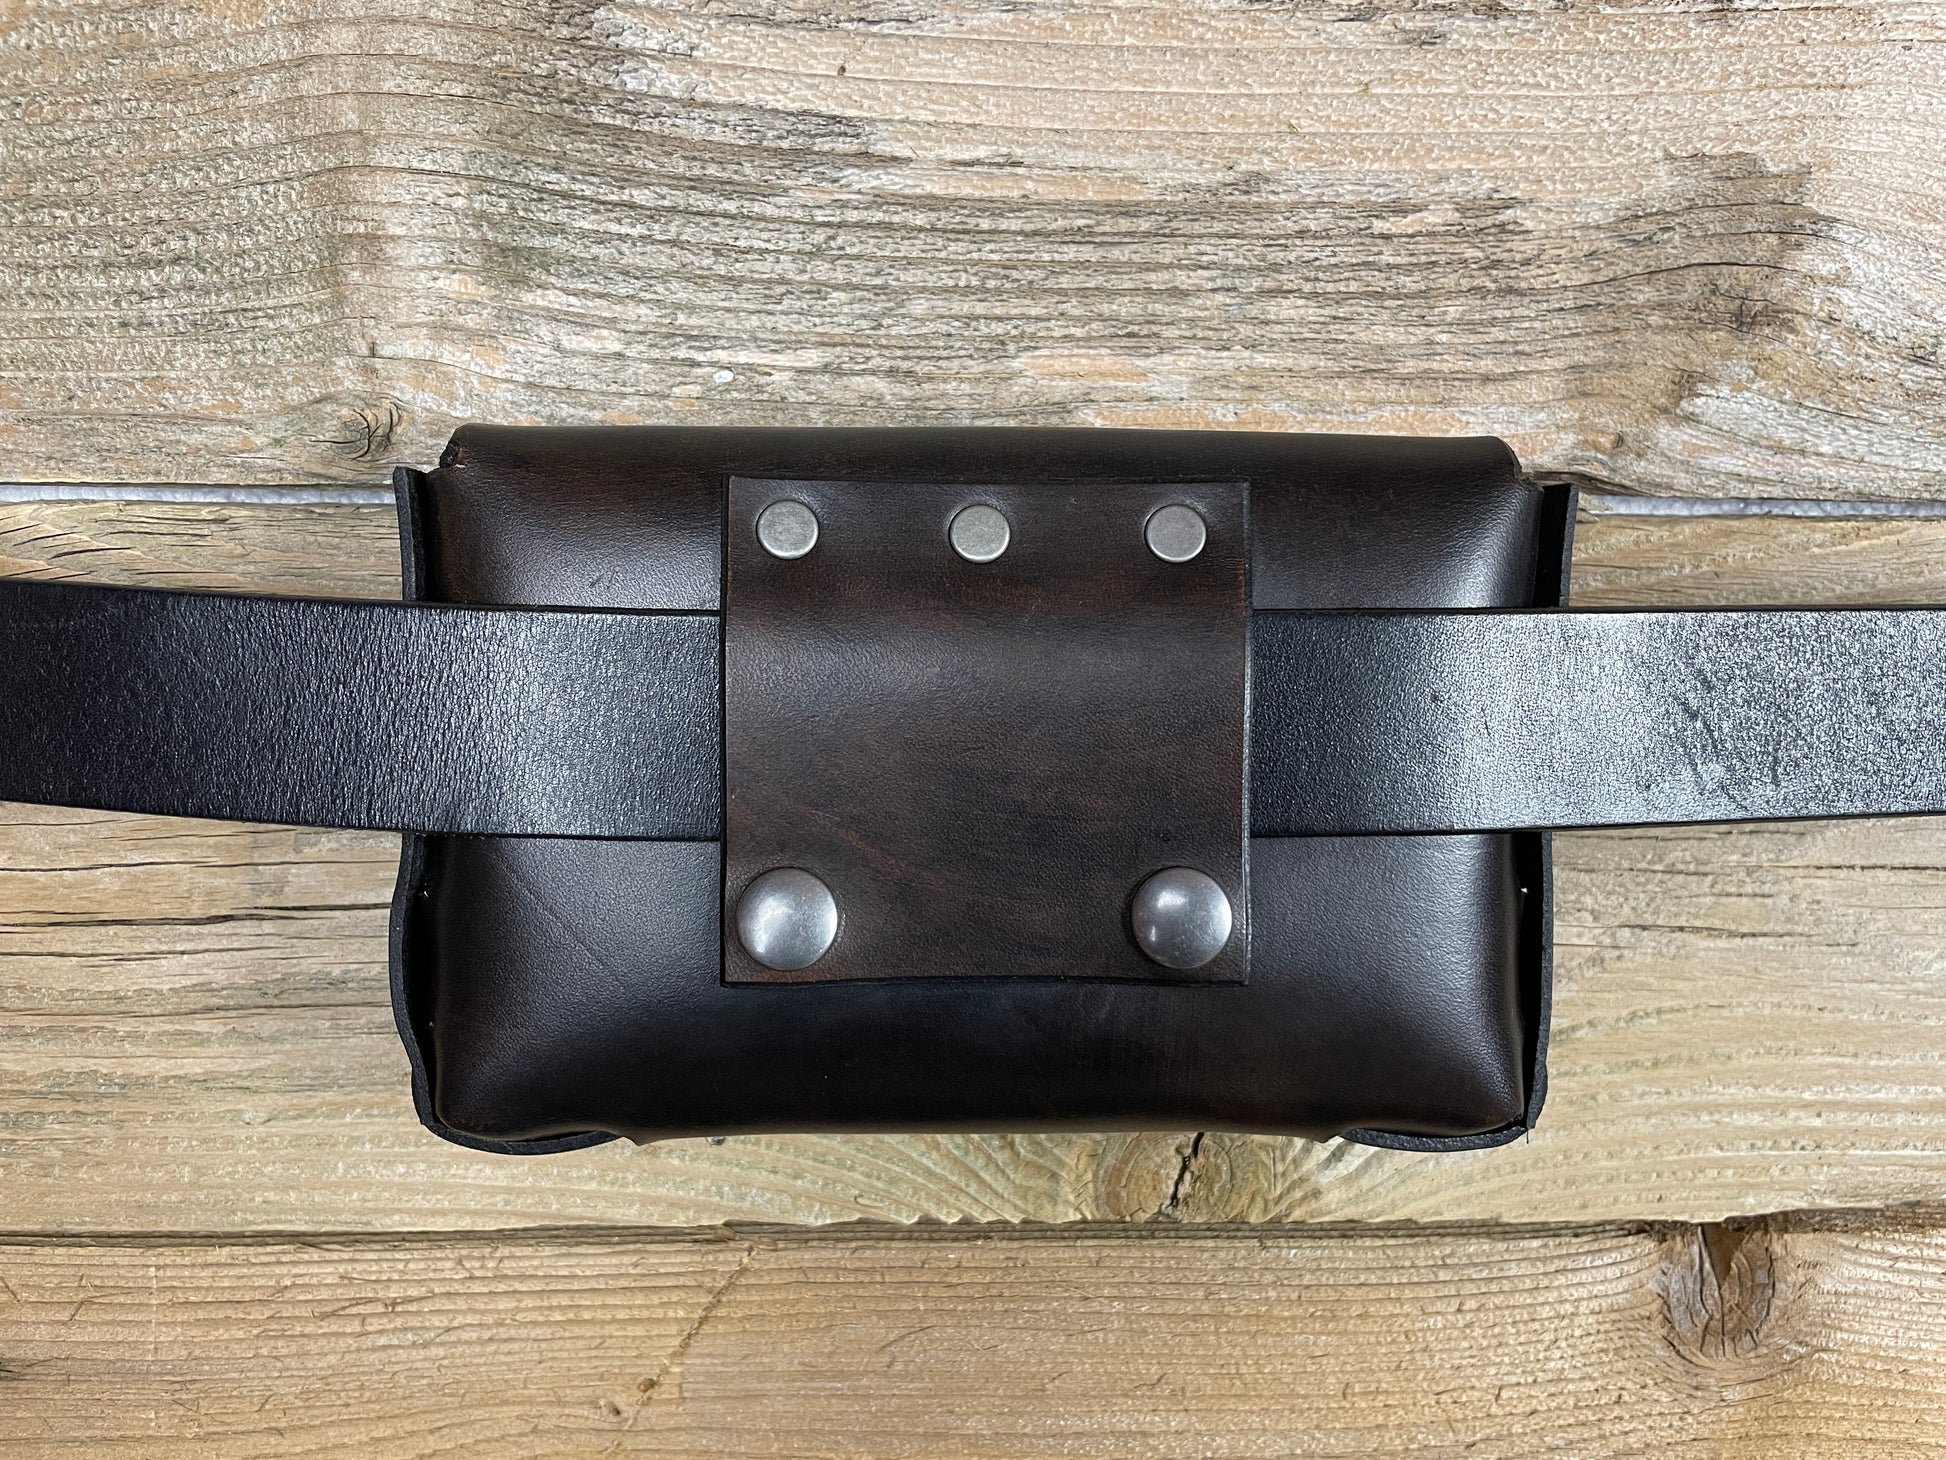 On the back side is the belt clip. You can either slide your own belt through or use the snaps to secure.